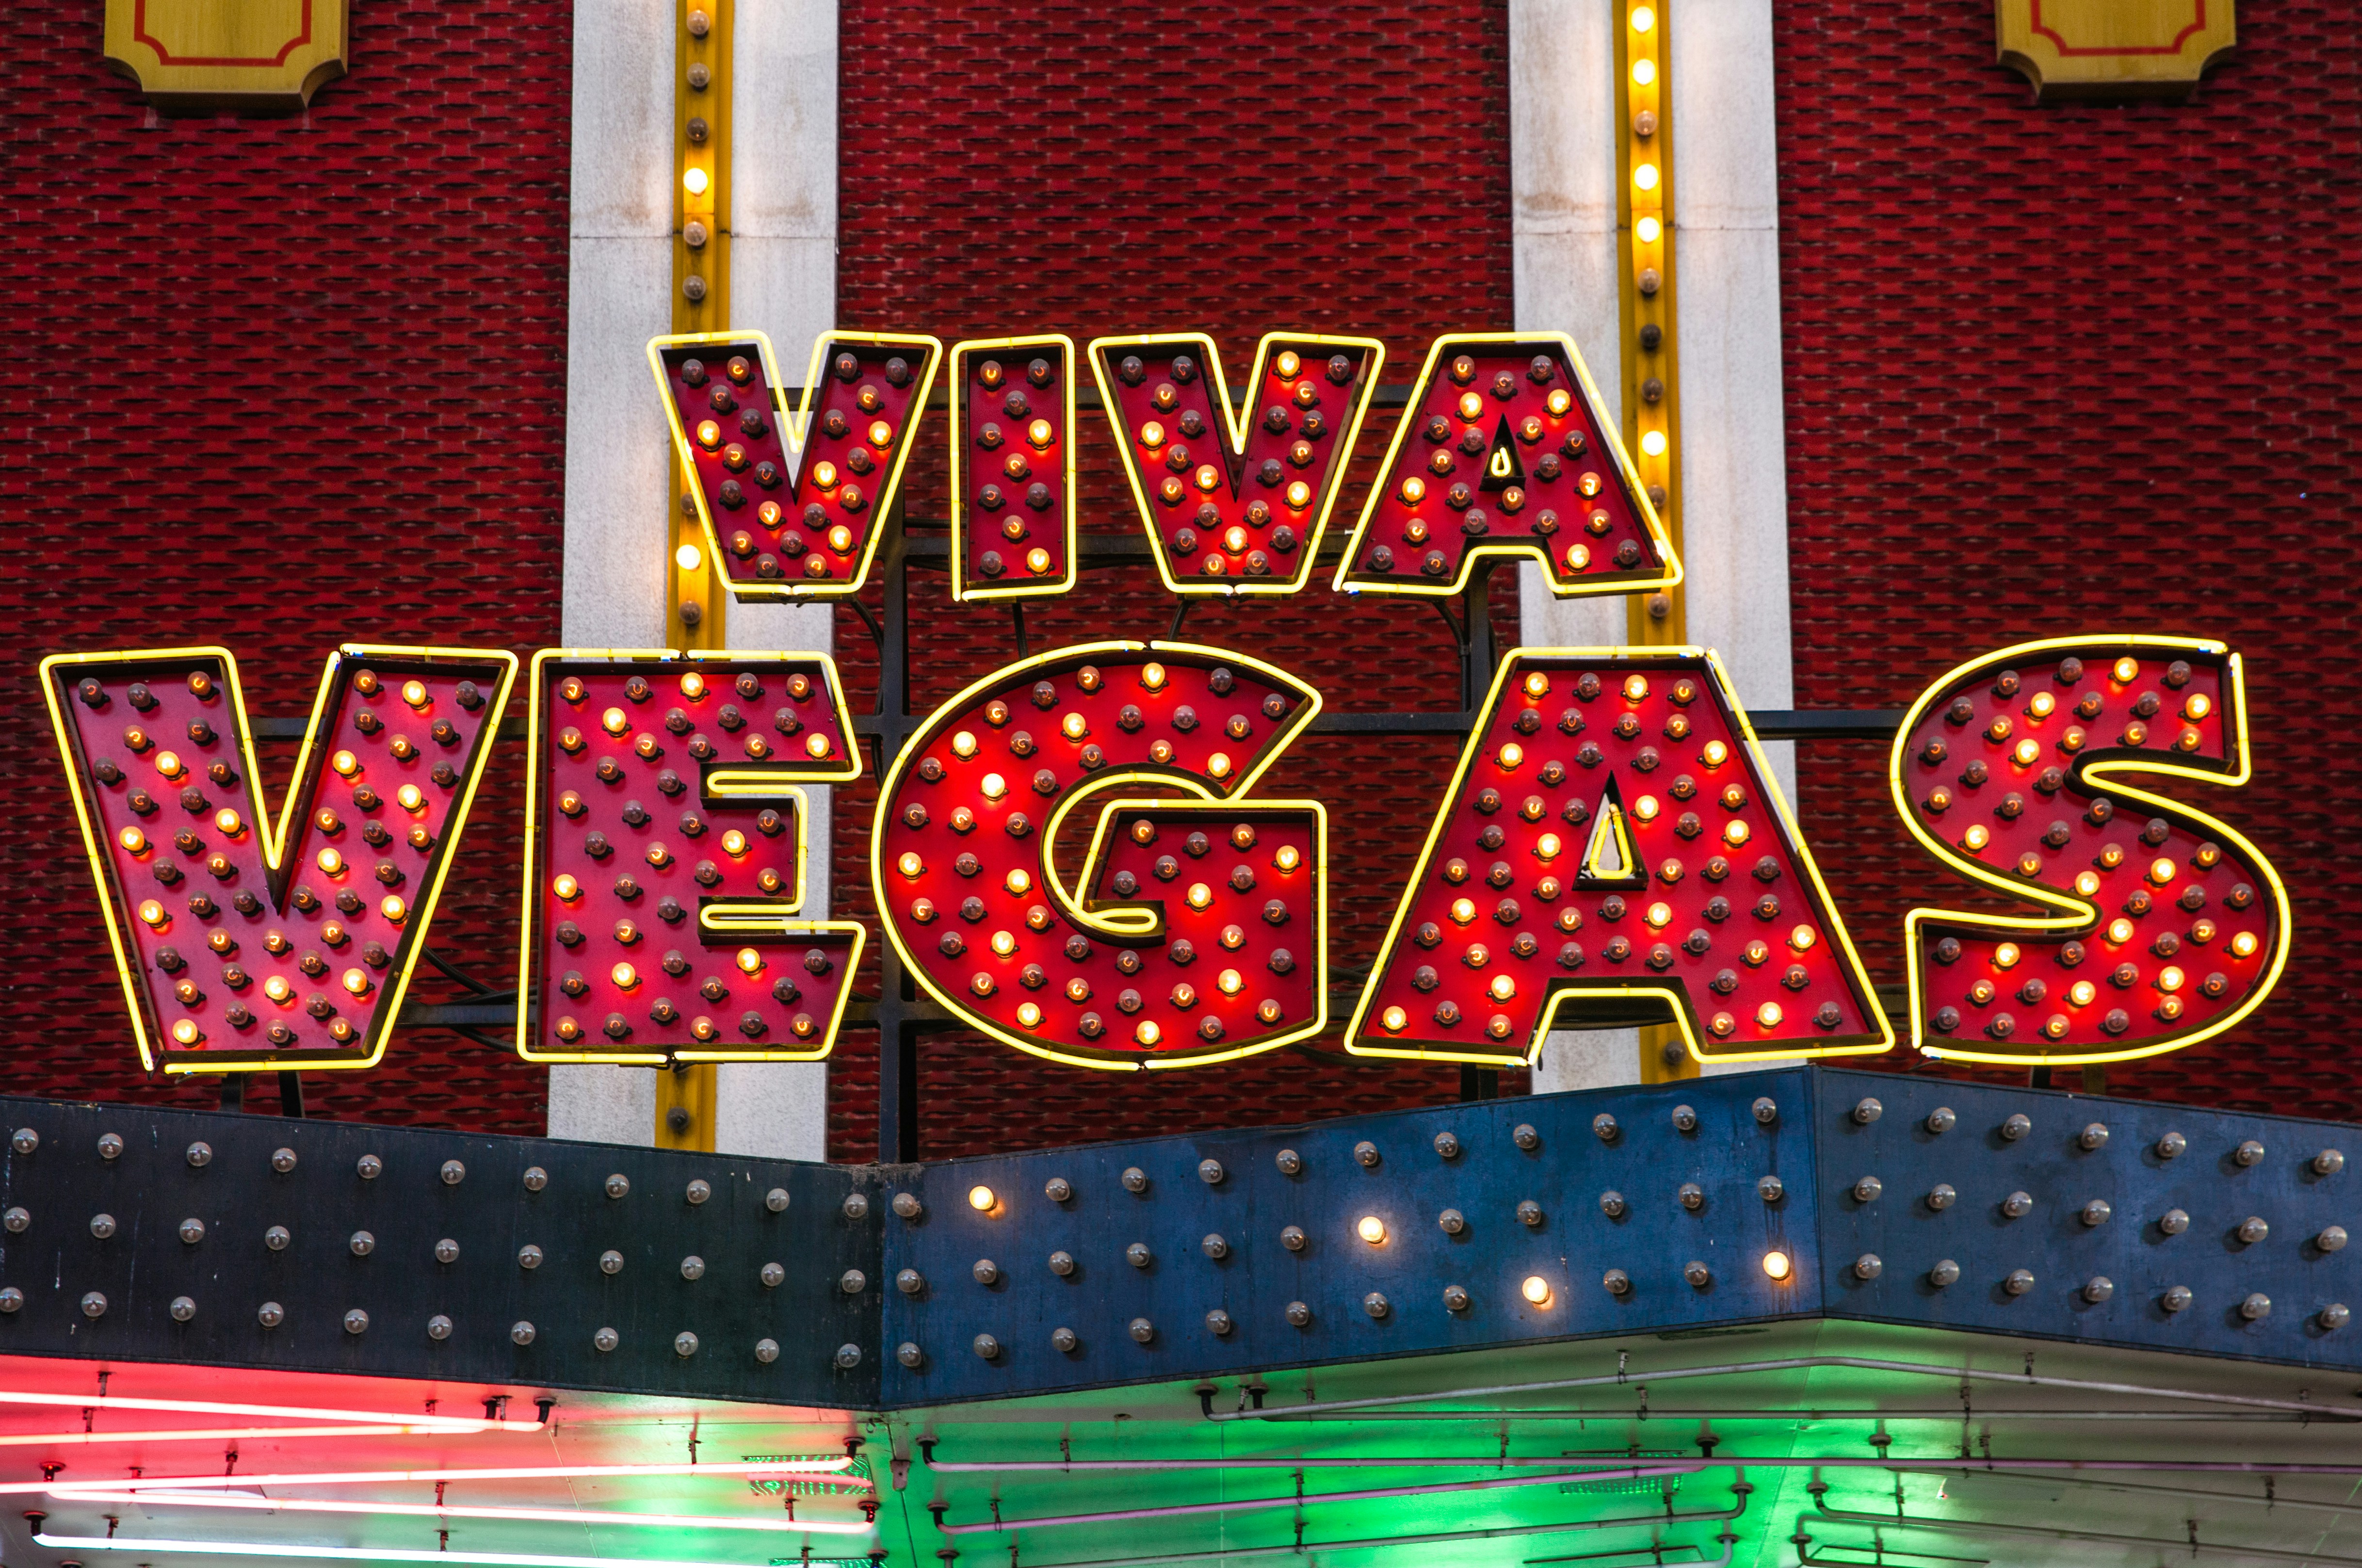 Light up sign saying "Viva Vegas" in red and gold